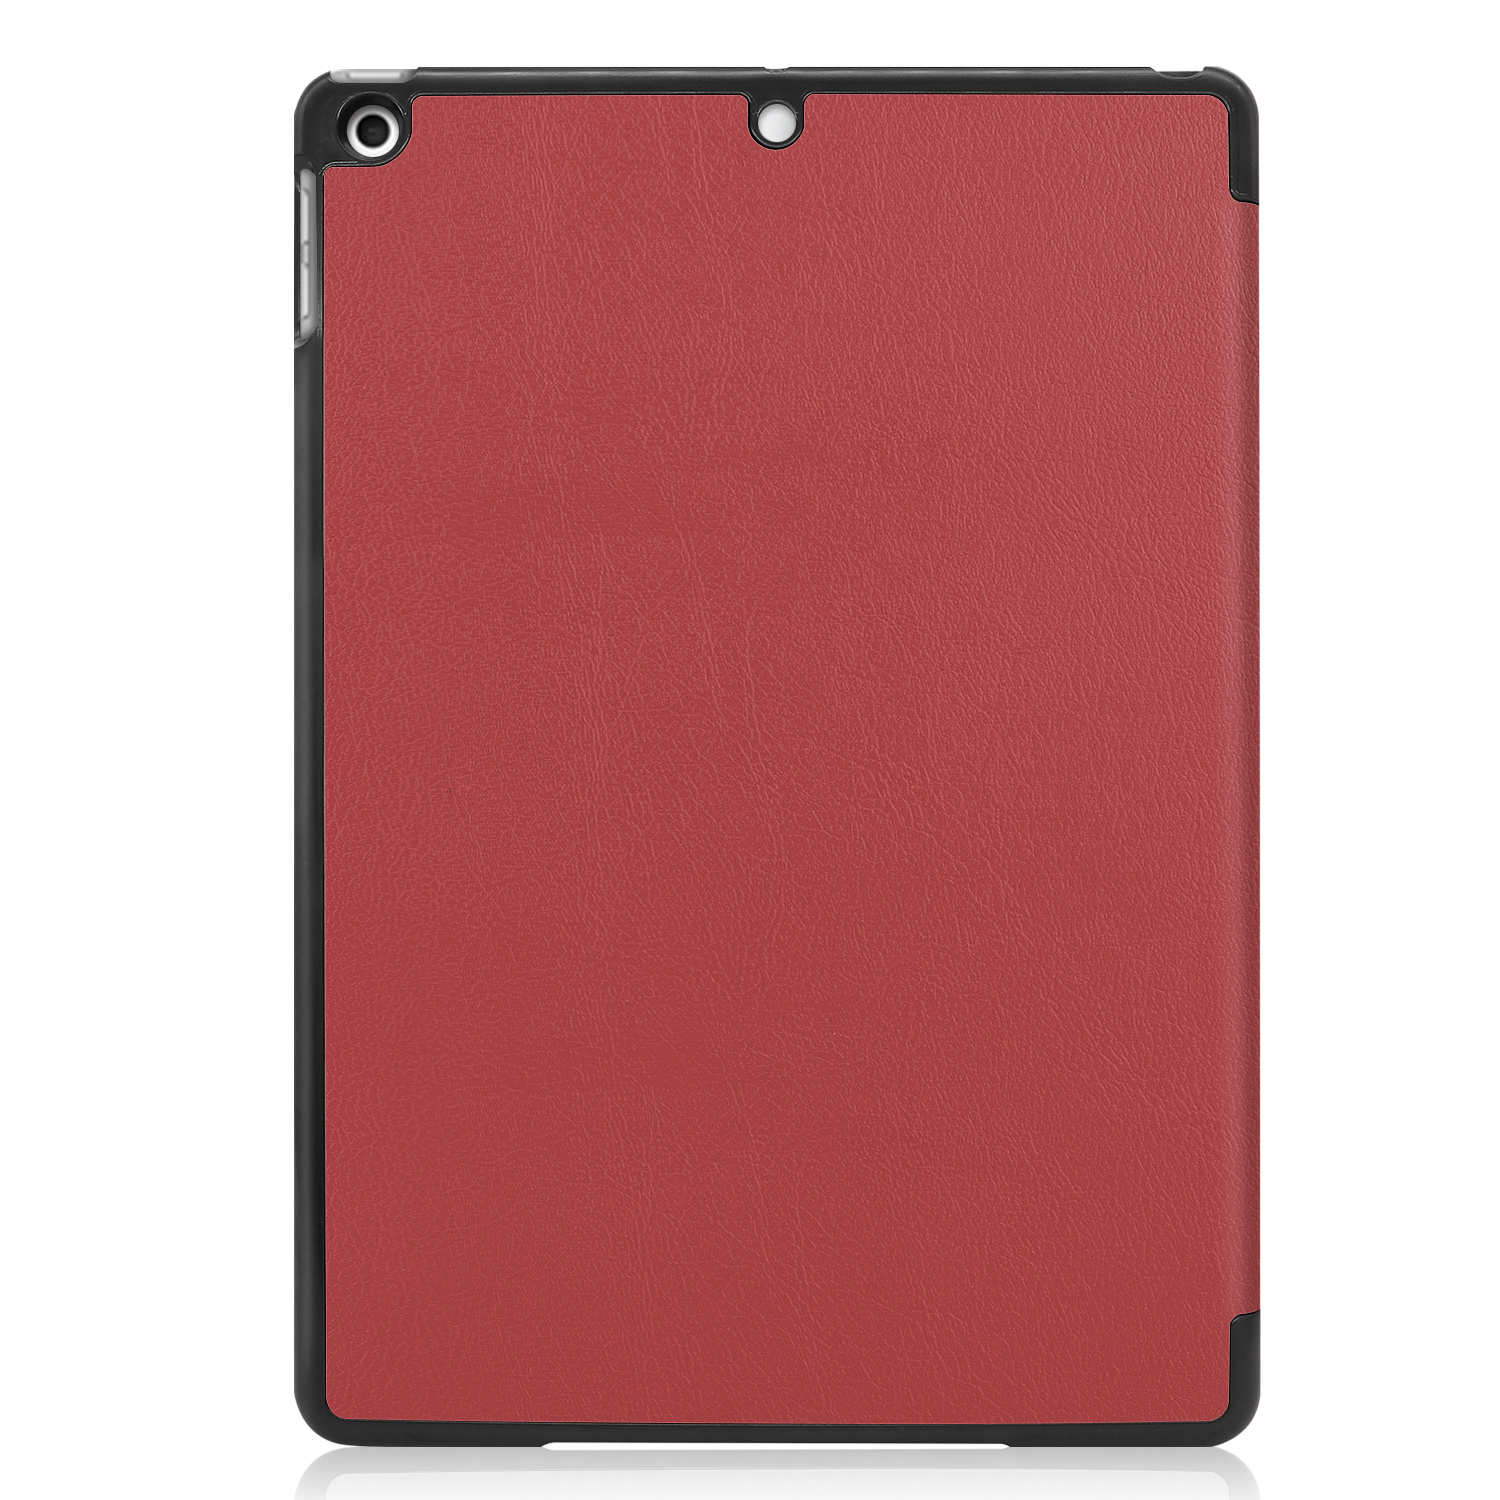 Nomfy iPad 10.2 2020 Hoesje Book Case Hoes - iPad 10.2 2020 Hoes Hardcover Case Hoesje - Donker Rood